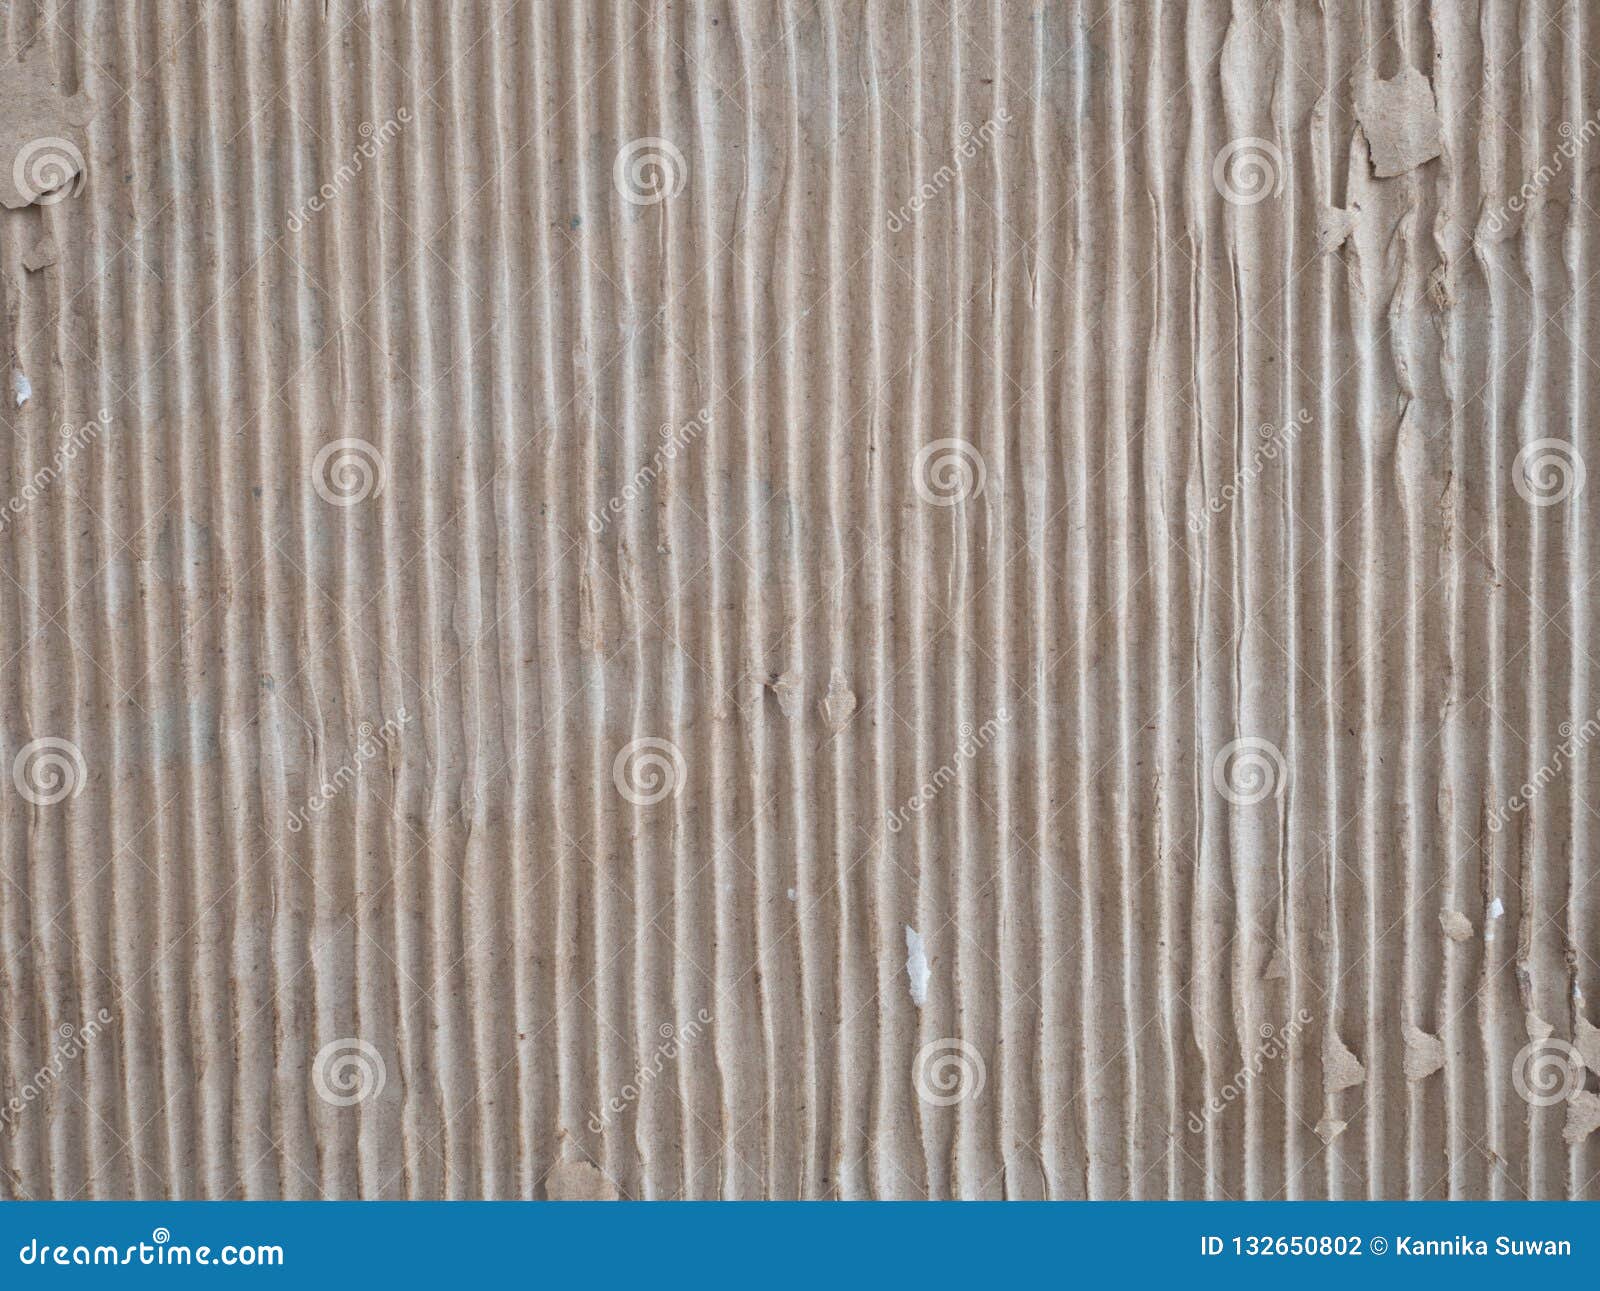 corrugated paper pattern for background and design